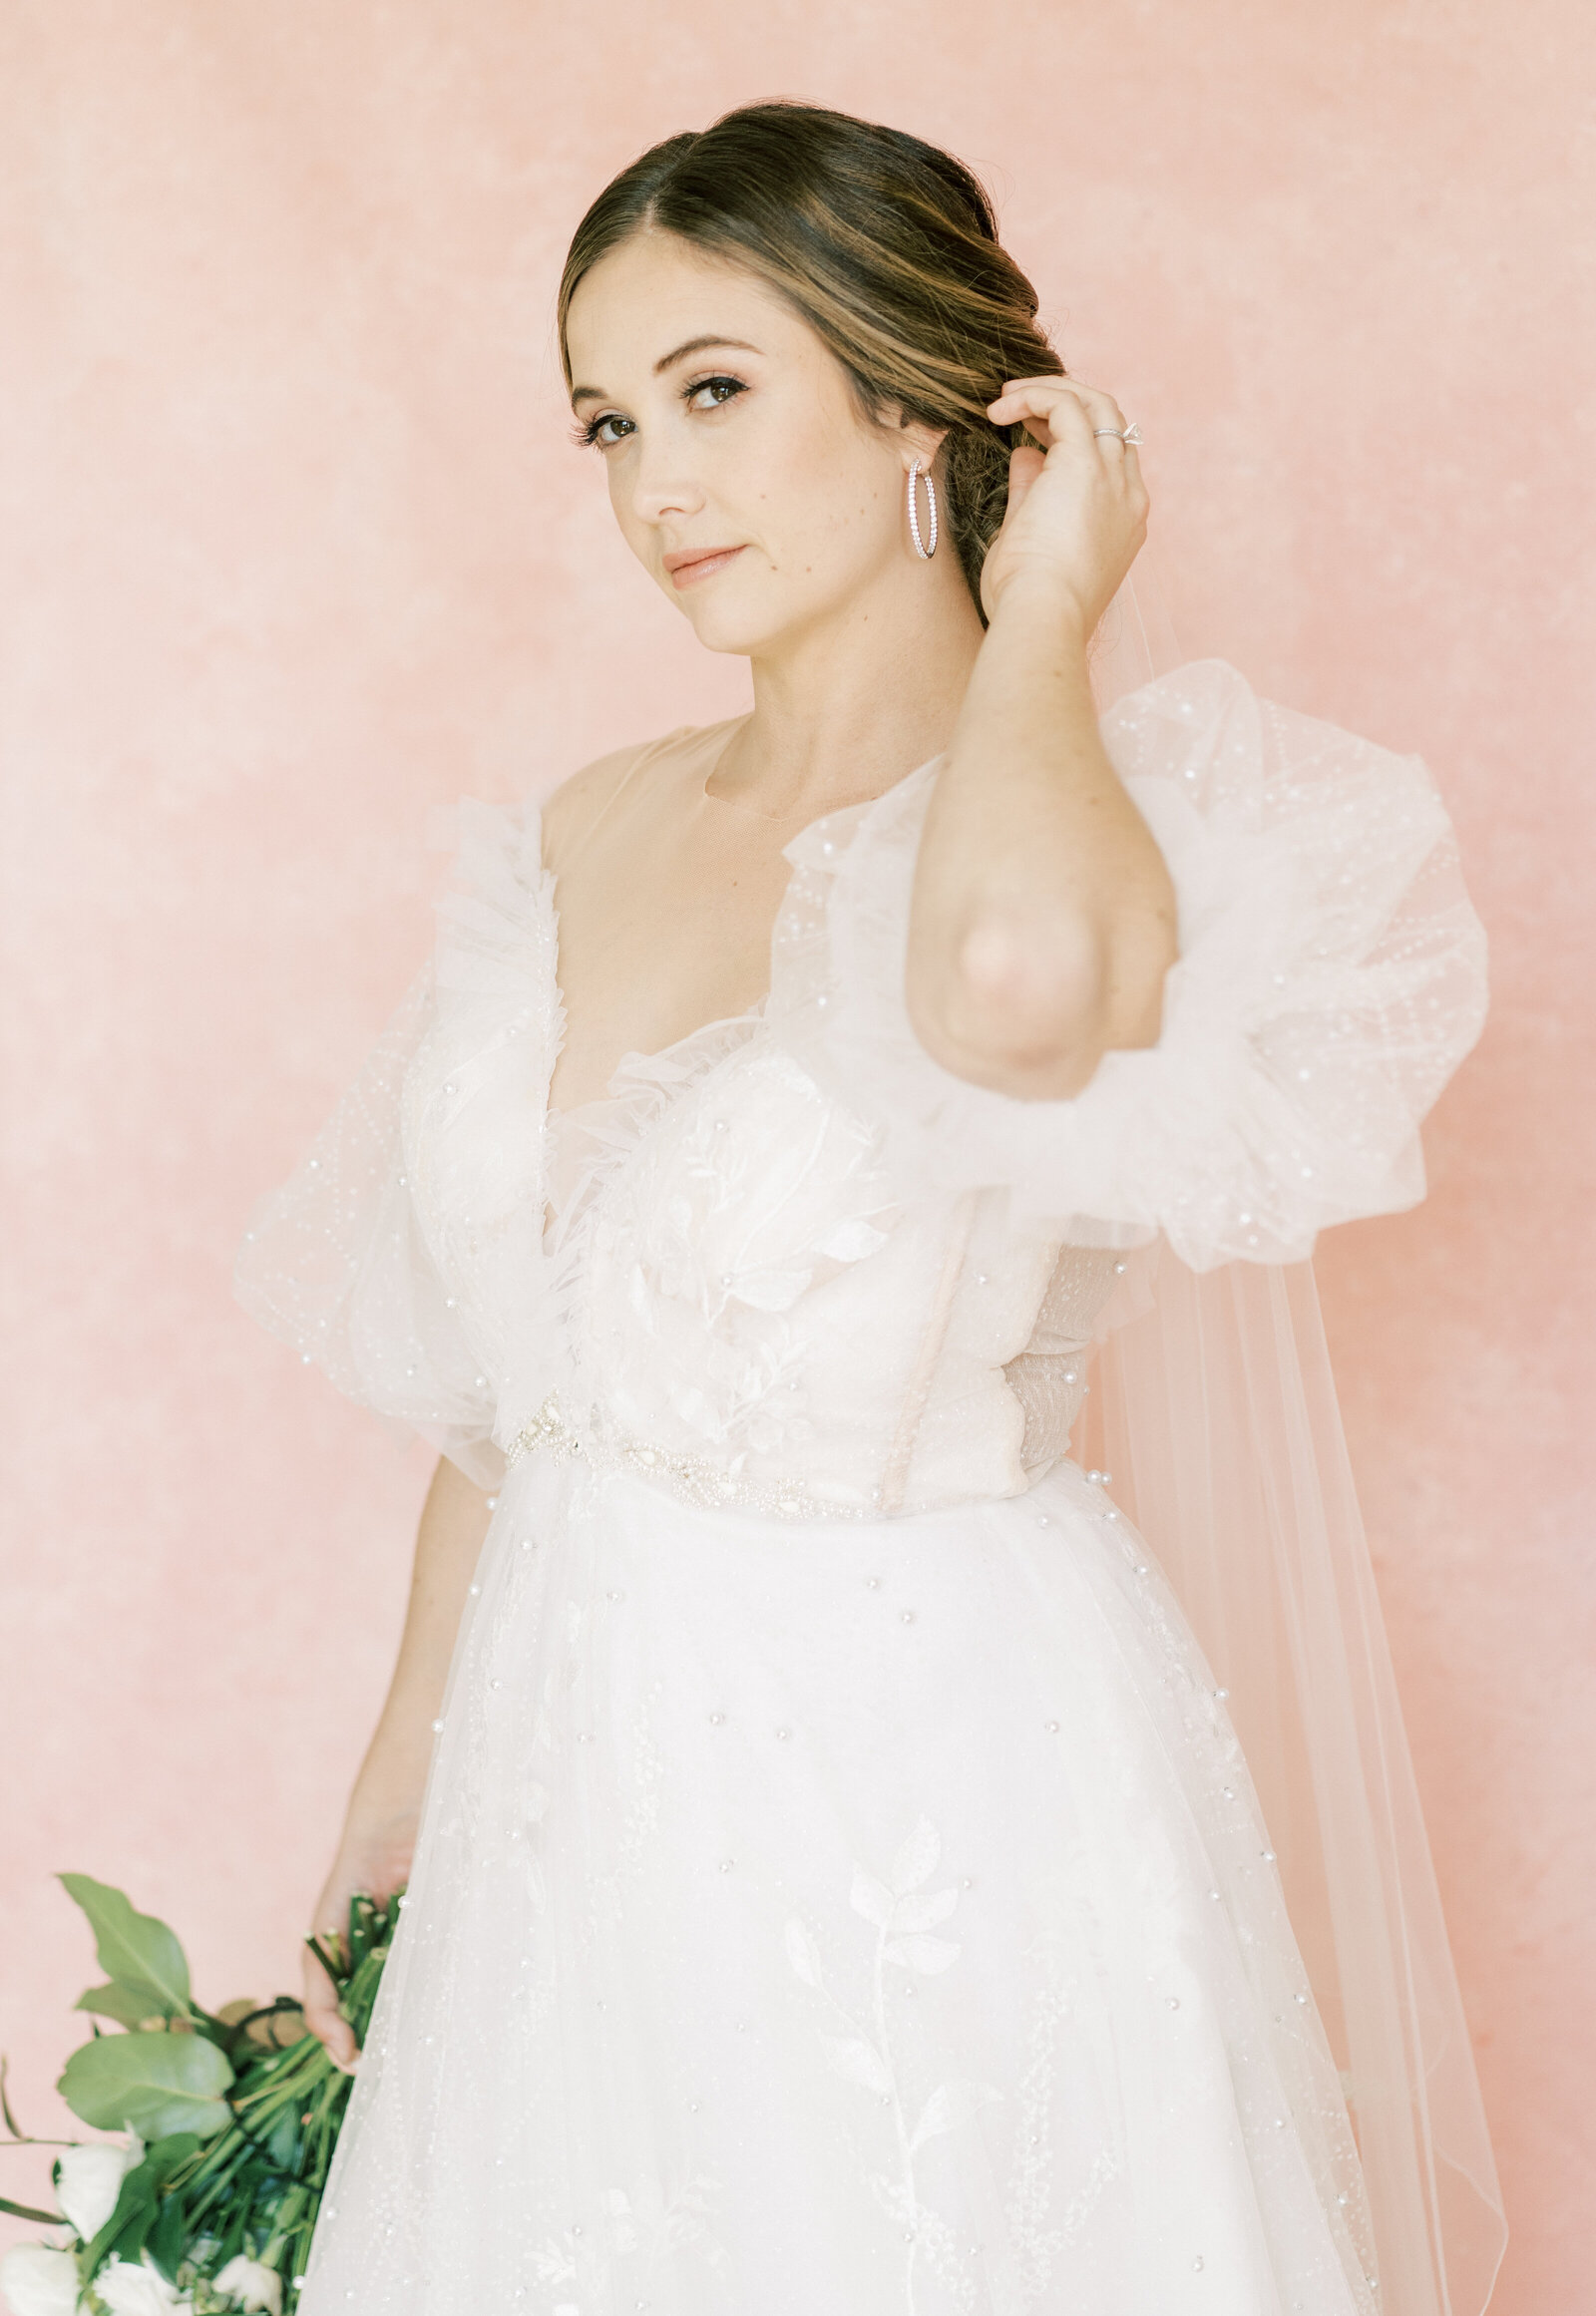 Portrait of a bride in a white beaded wedding gown with pink backdrop and bouquet of flowers.